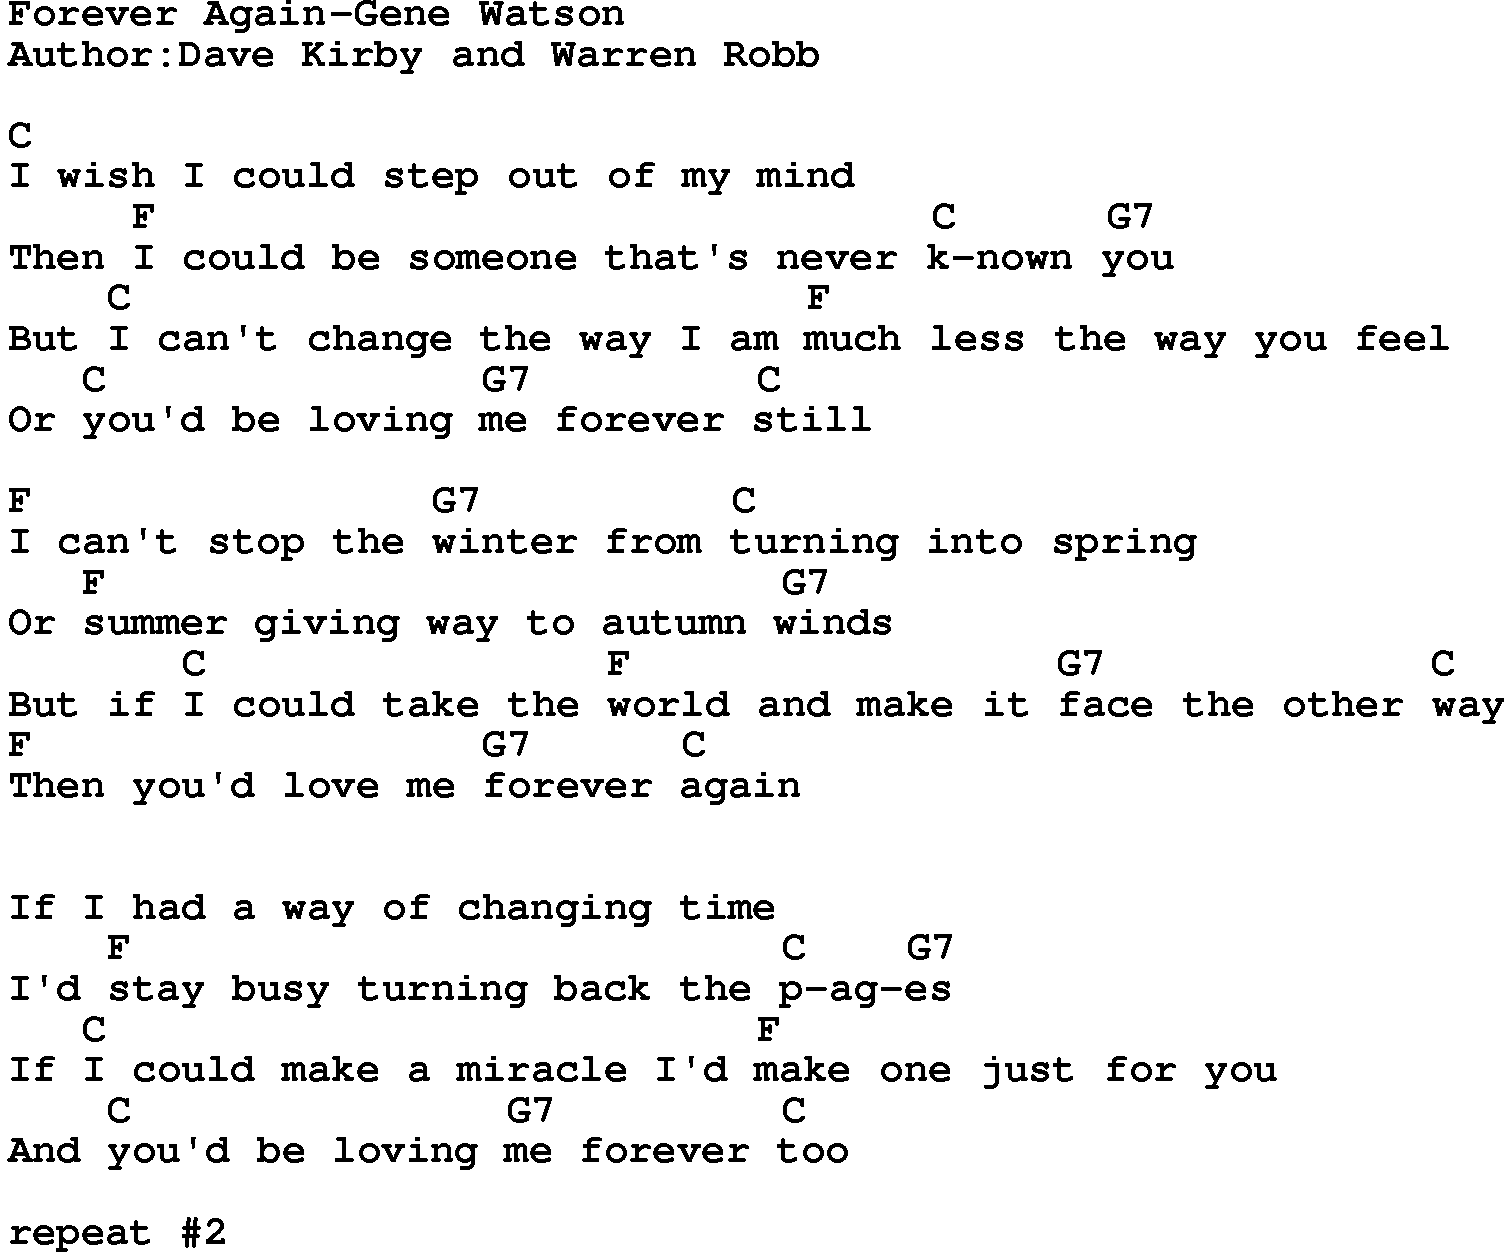 Country music song: Forever Again-Gene Watson lyrics and chords